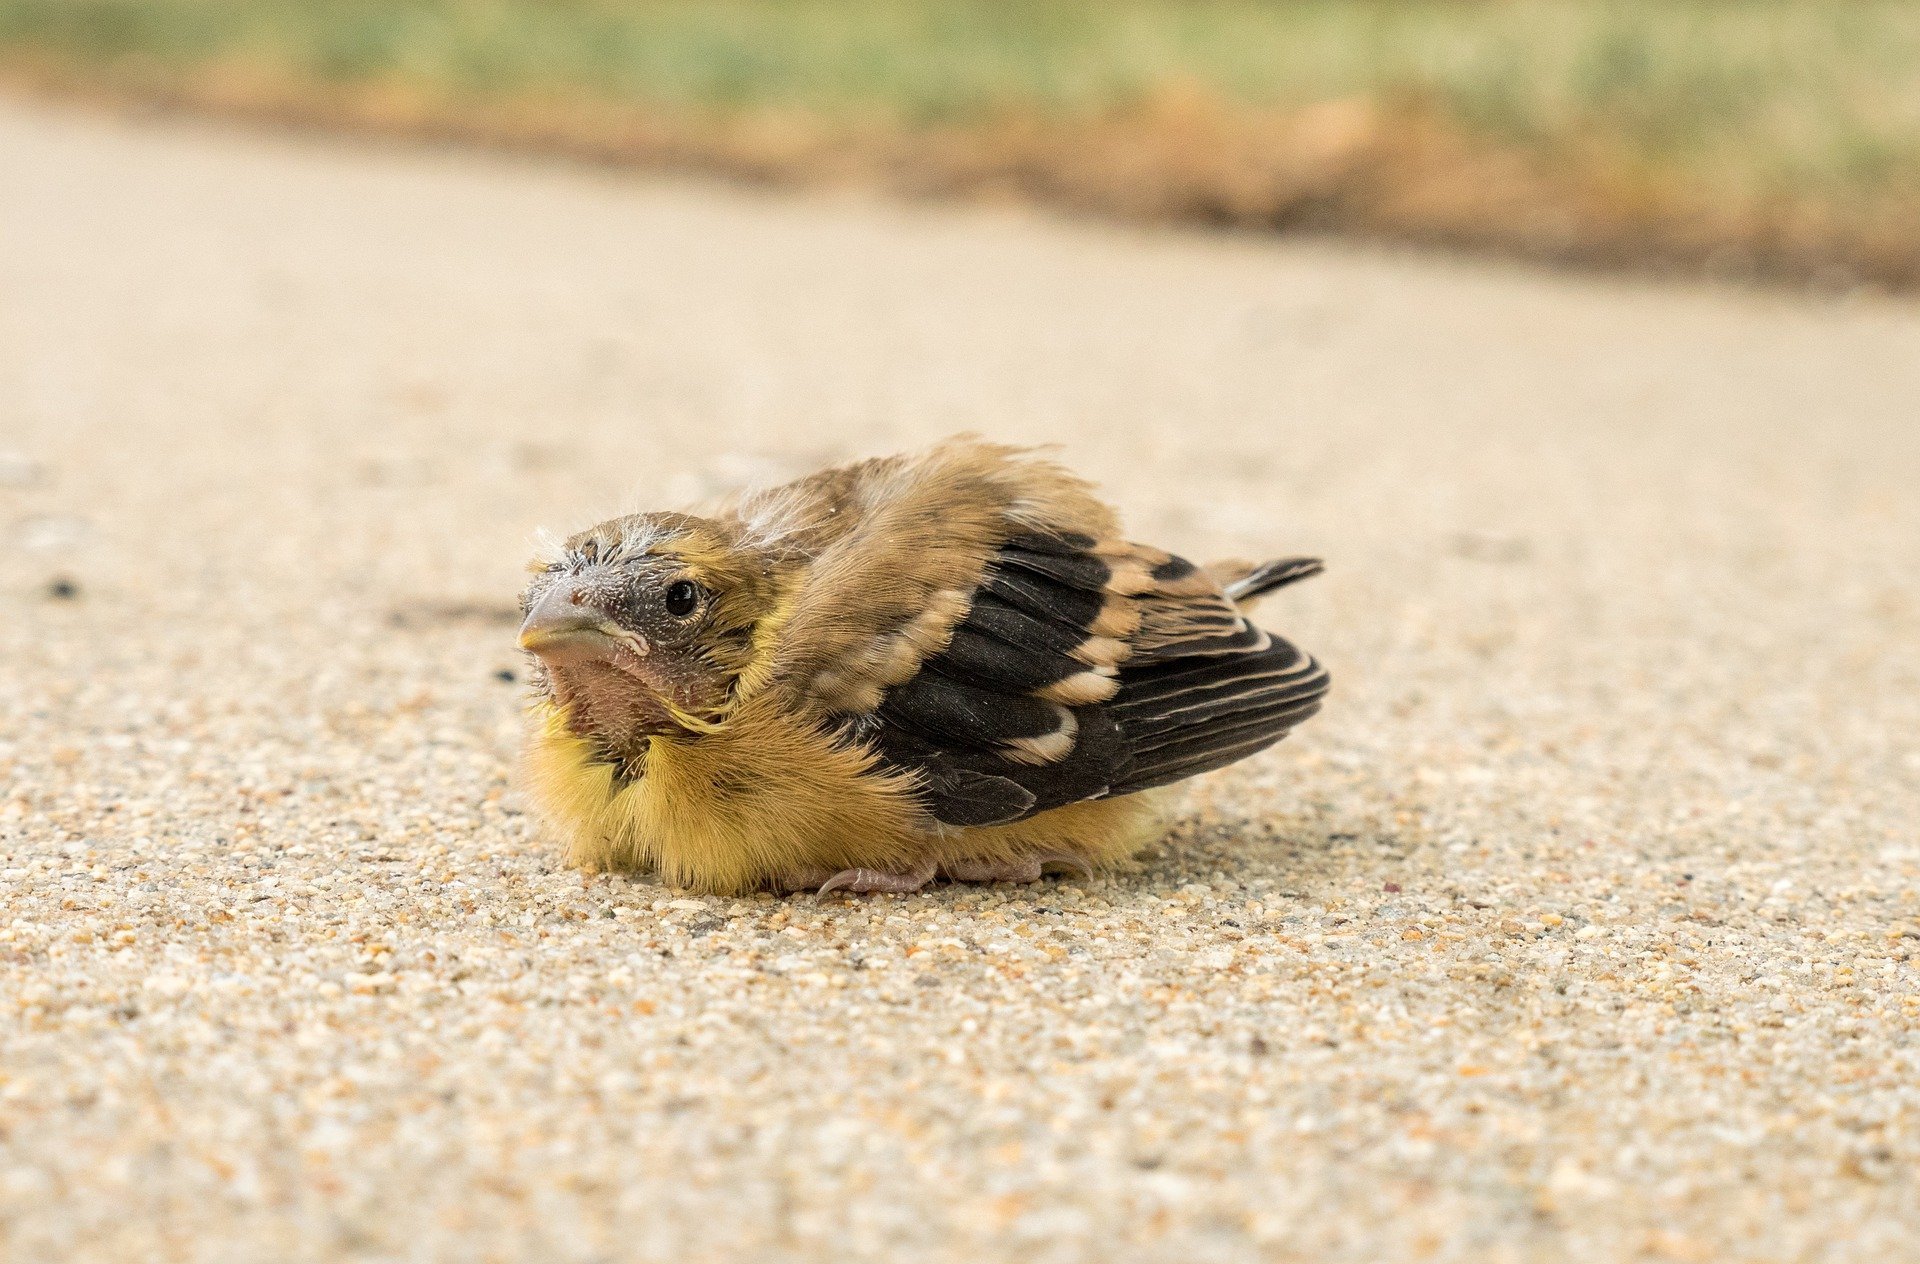 When To Help A Baby Bird, And When To Leave It Alone